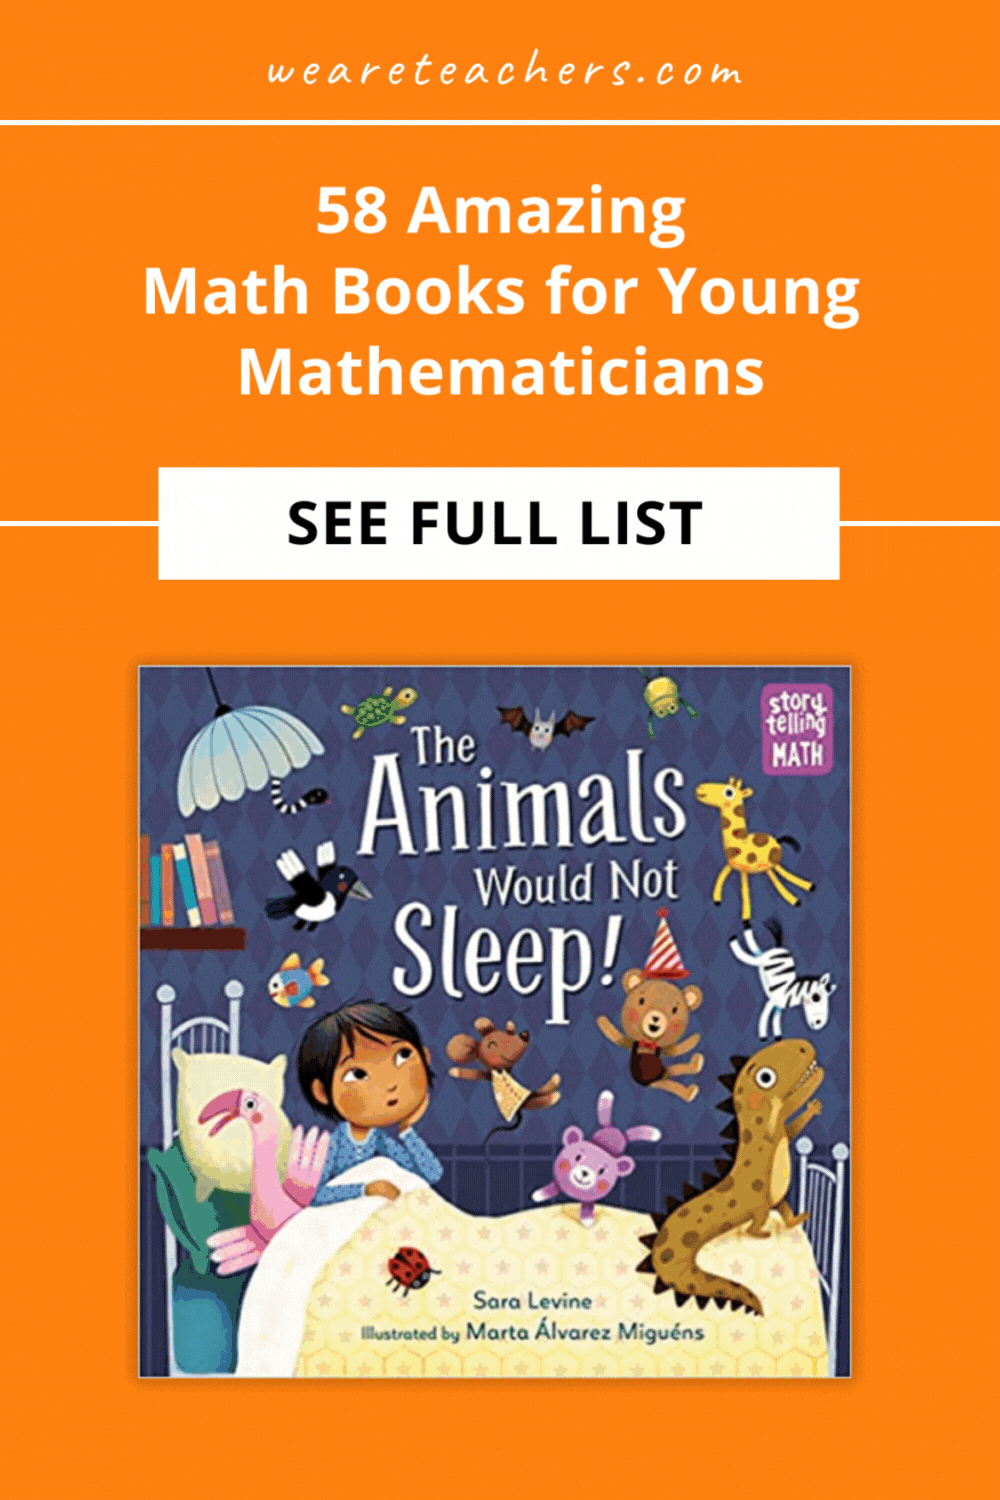 Children's math books are the best tool for getting kids excited about math concepts and keeping math conversations going all day long!